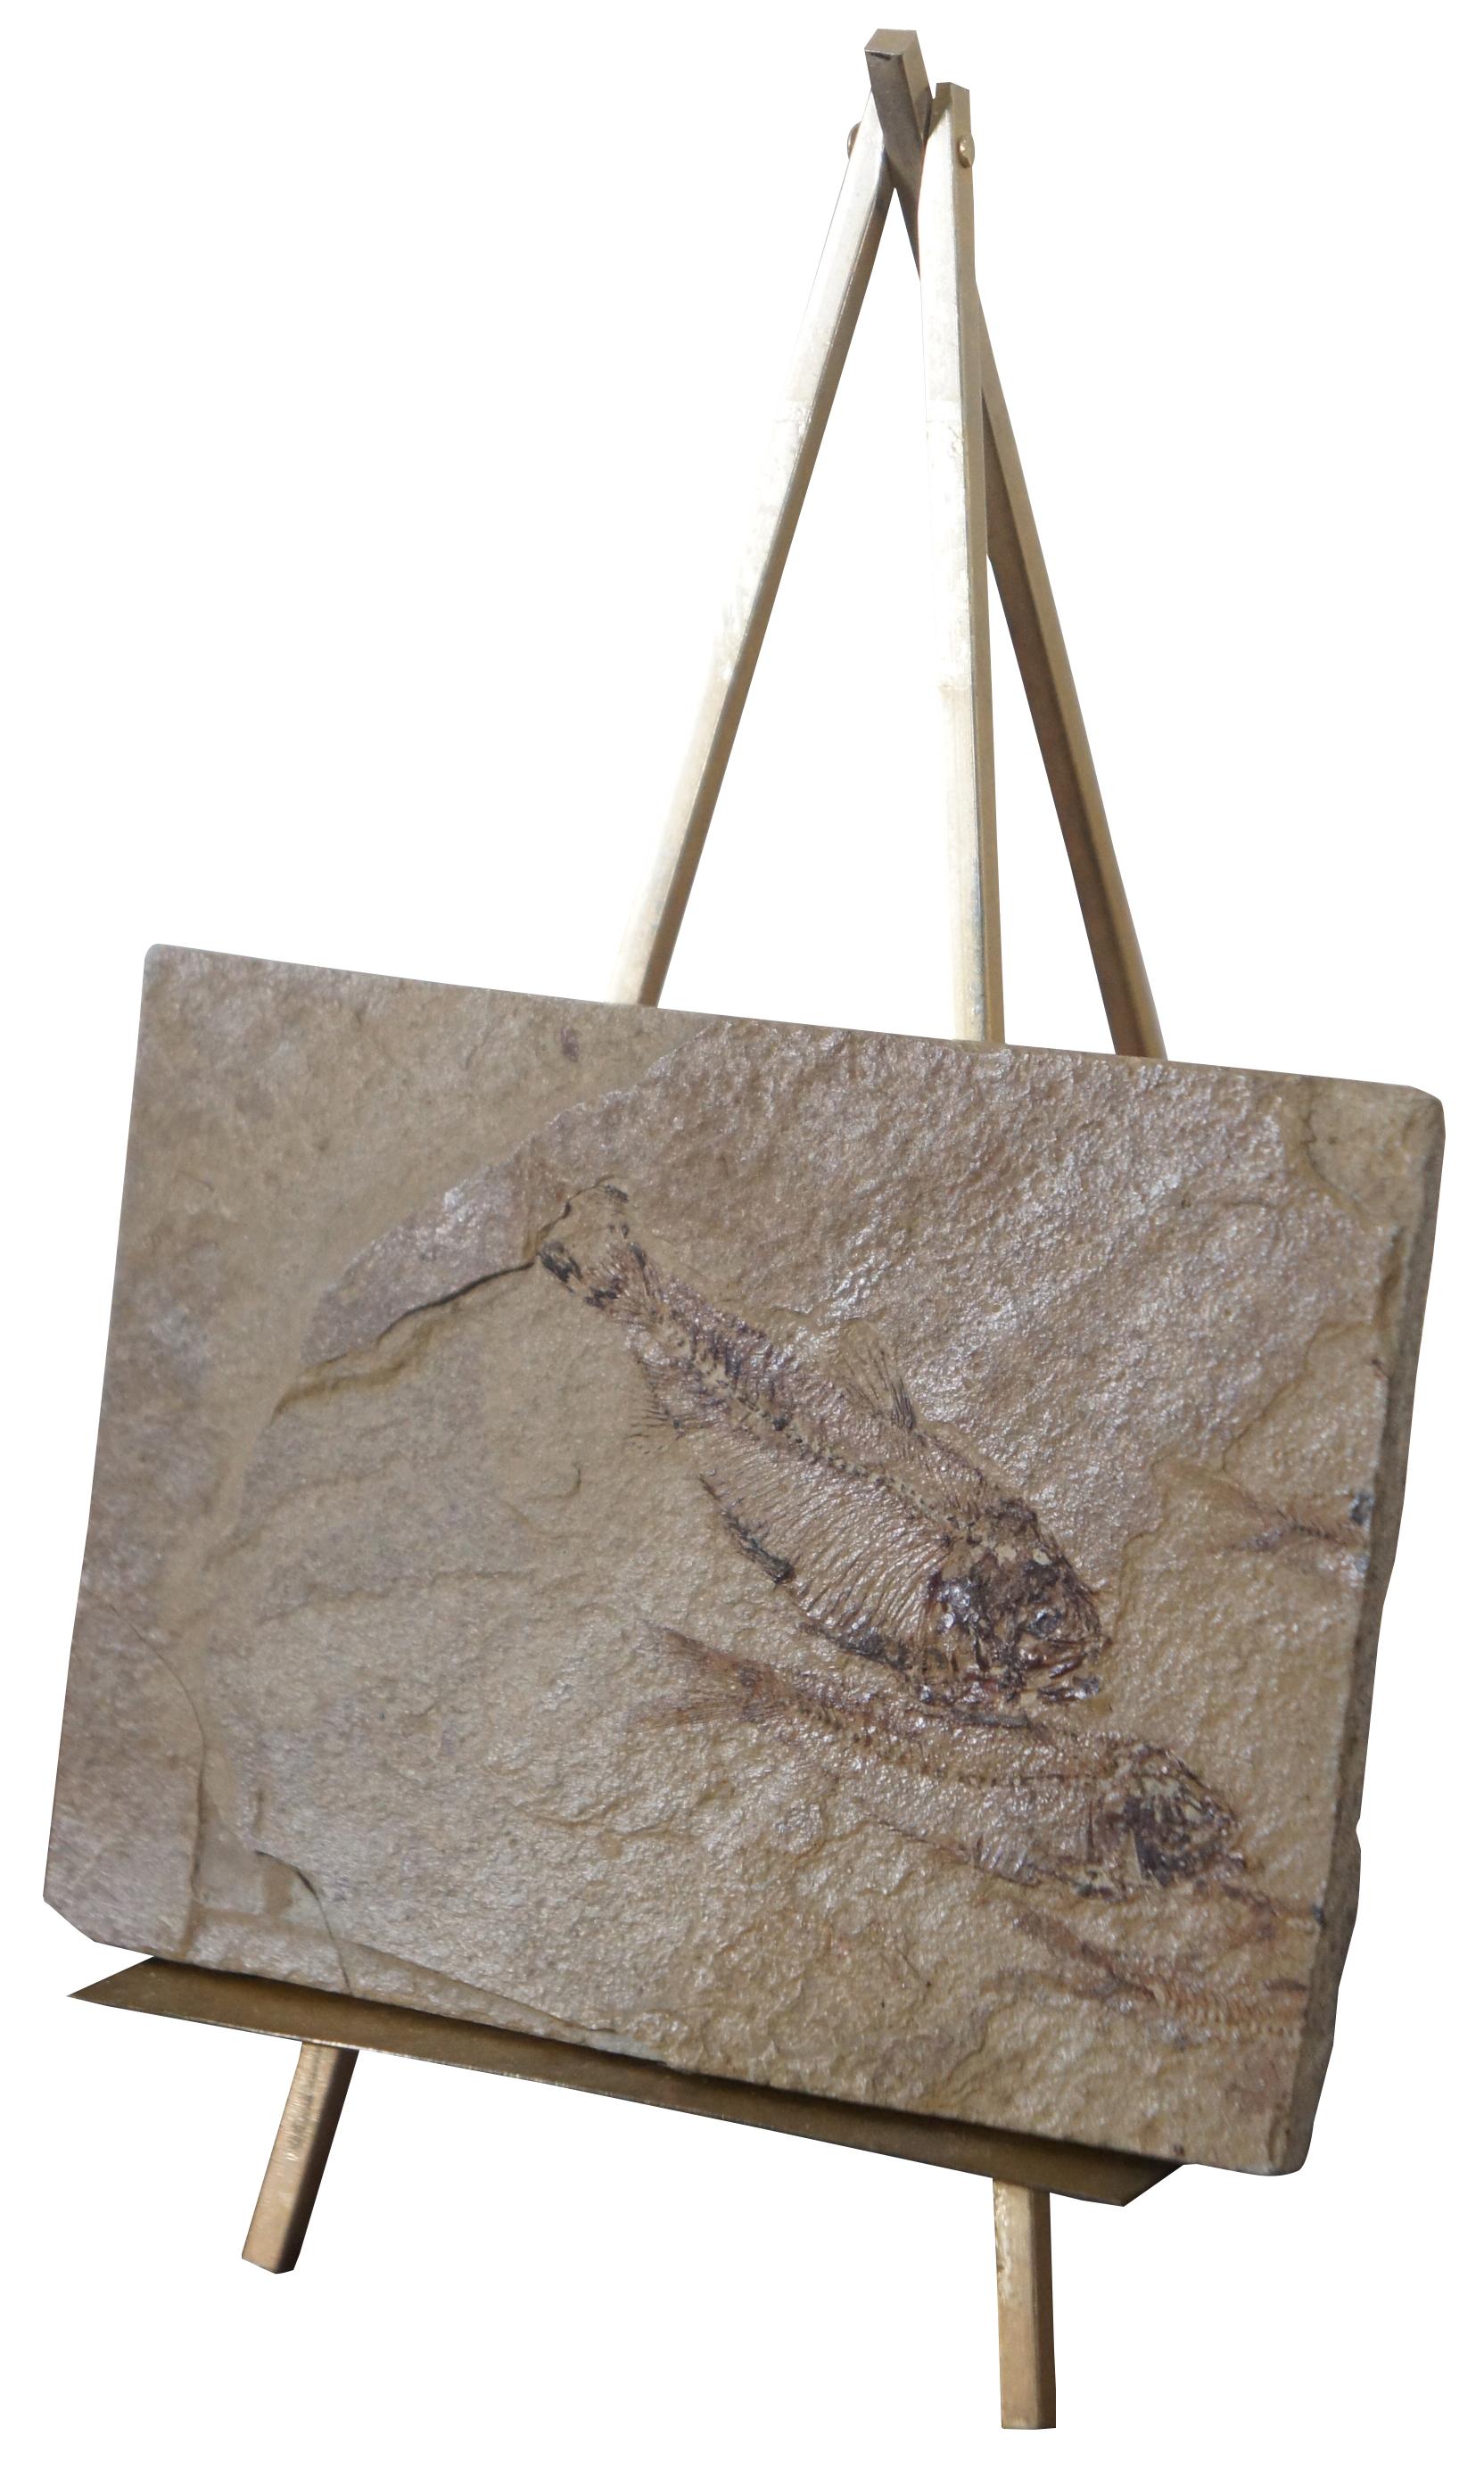 60,000,000 year old double fish fossil found in Farson, Wyoming from the Eocene Age. Includes brass easel for display.

Measures: Fossil 4” x 3” x 0.25” / easel 3.25” x 5” x 6” (Width x depth x height).